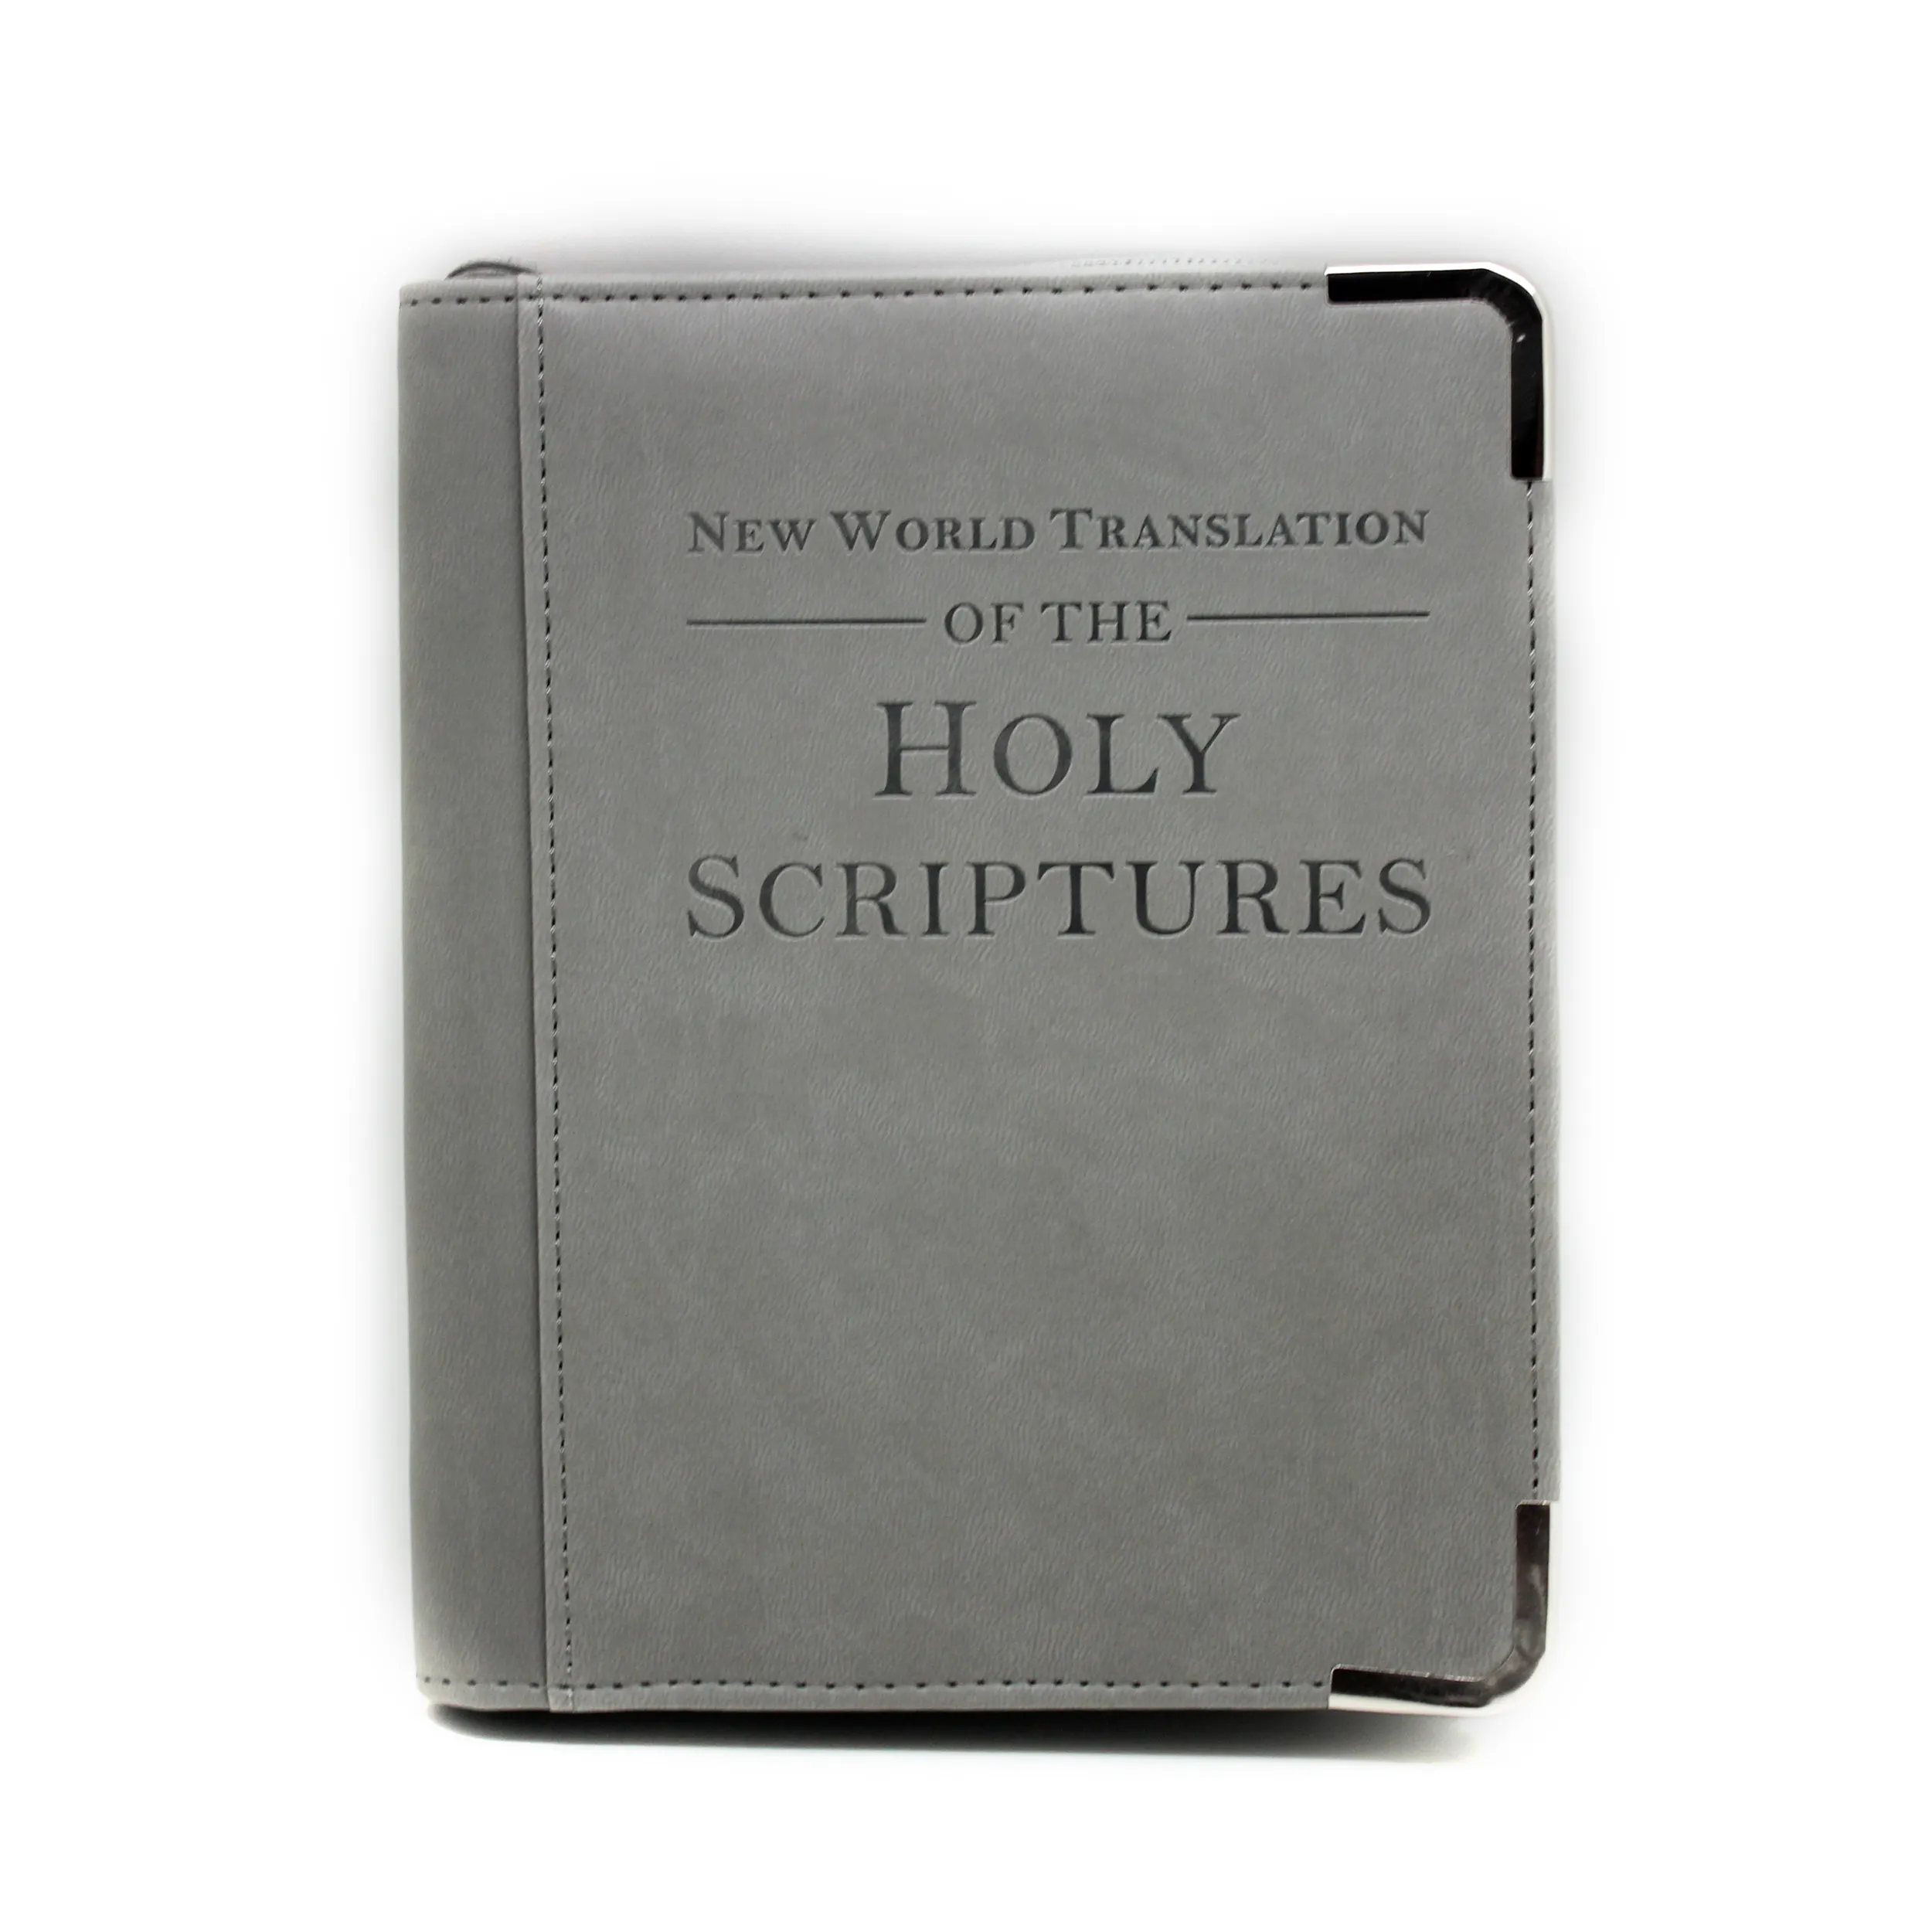 Boshiho Custom embossed leather Bible cover with zipper